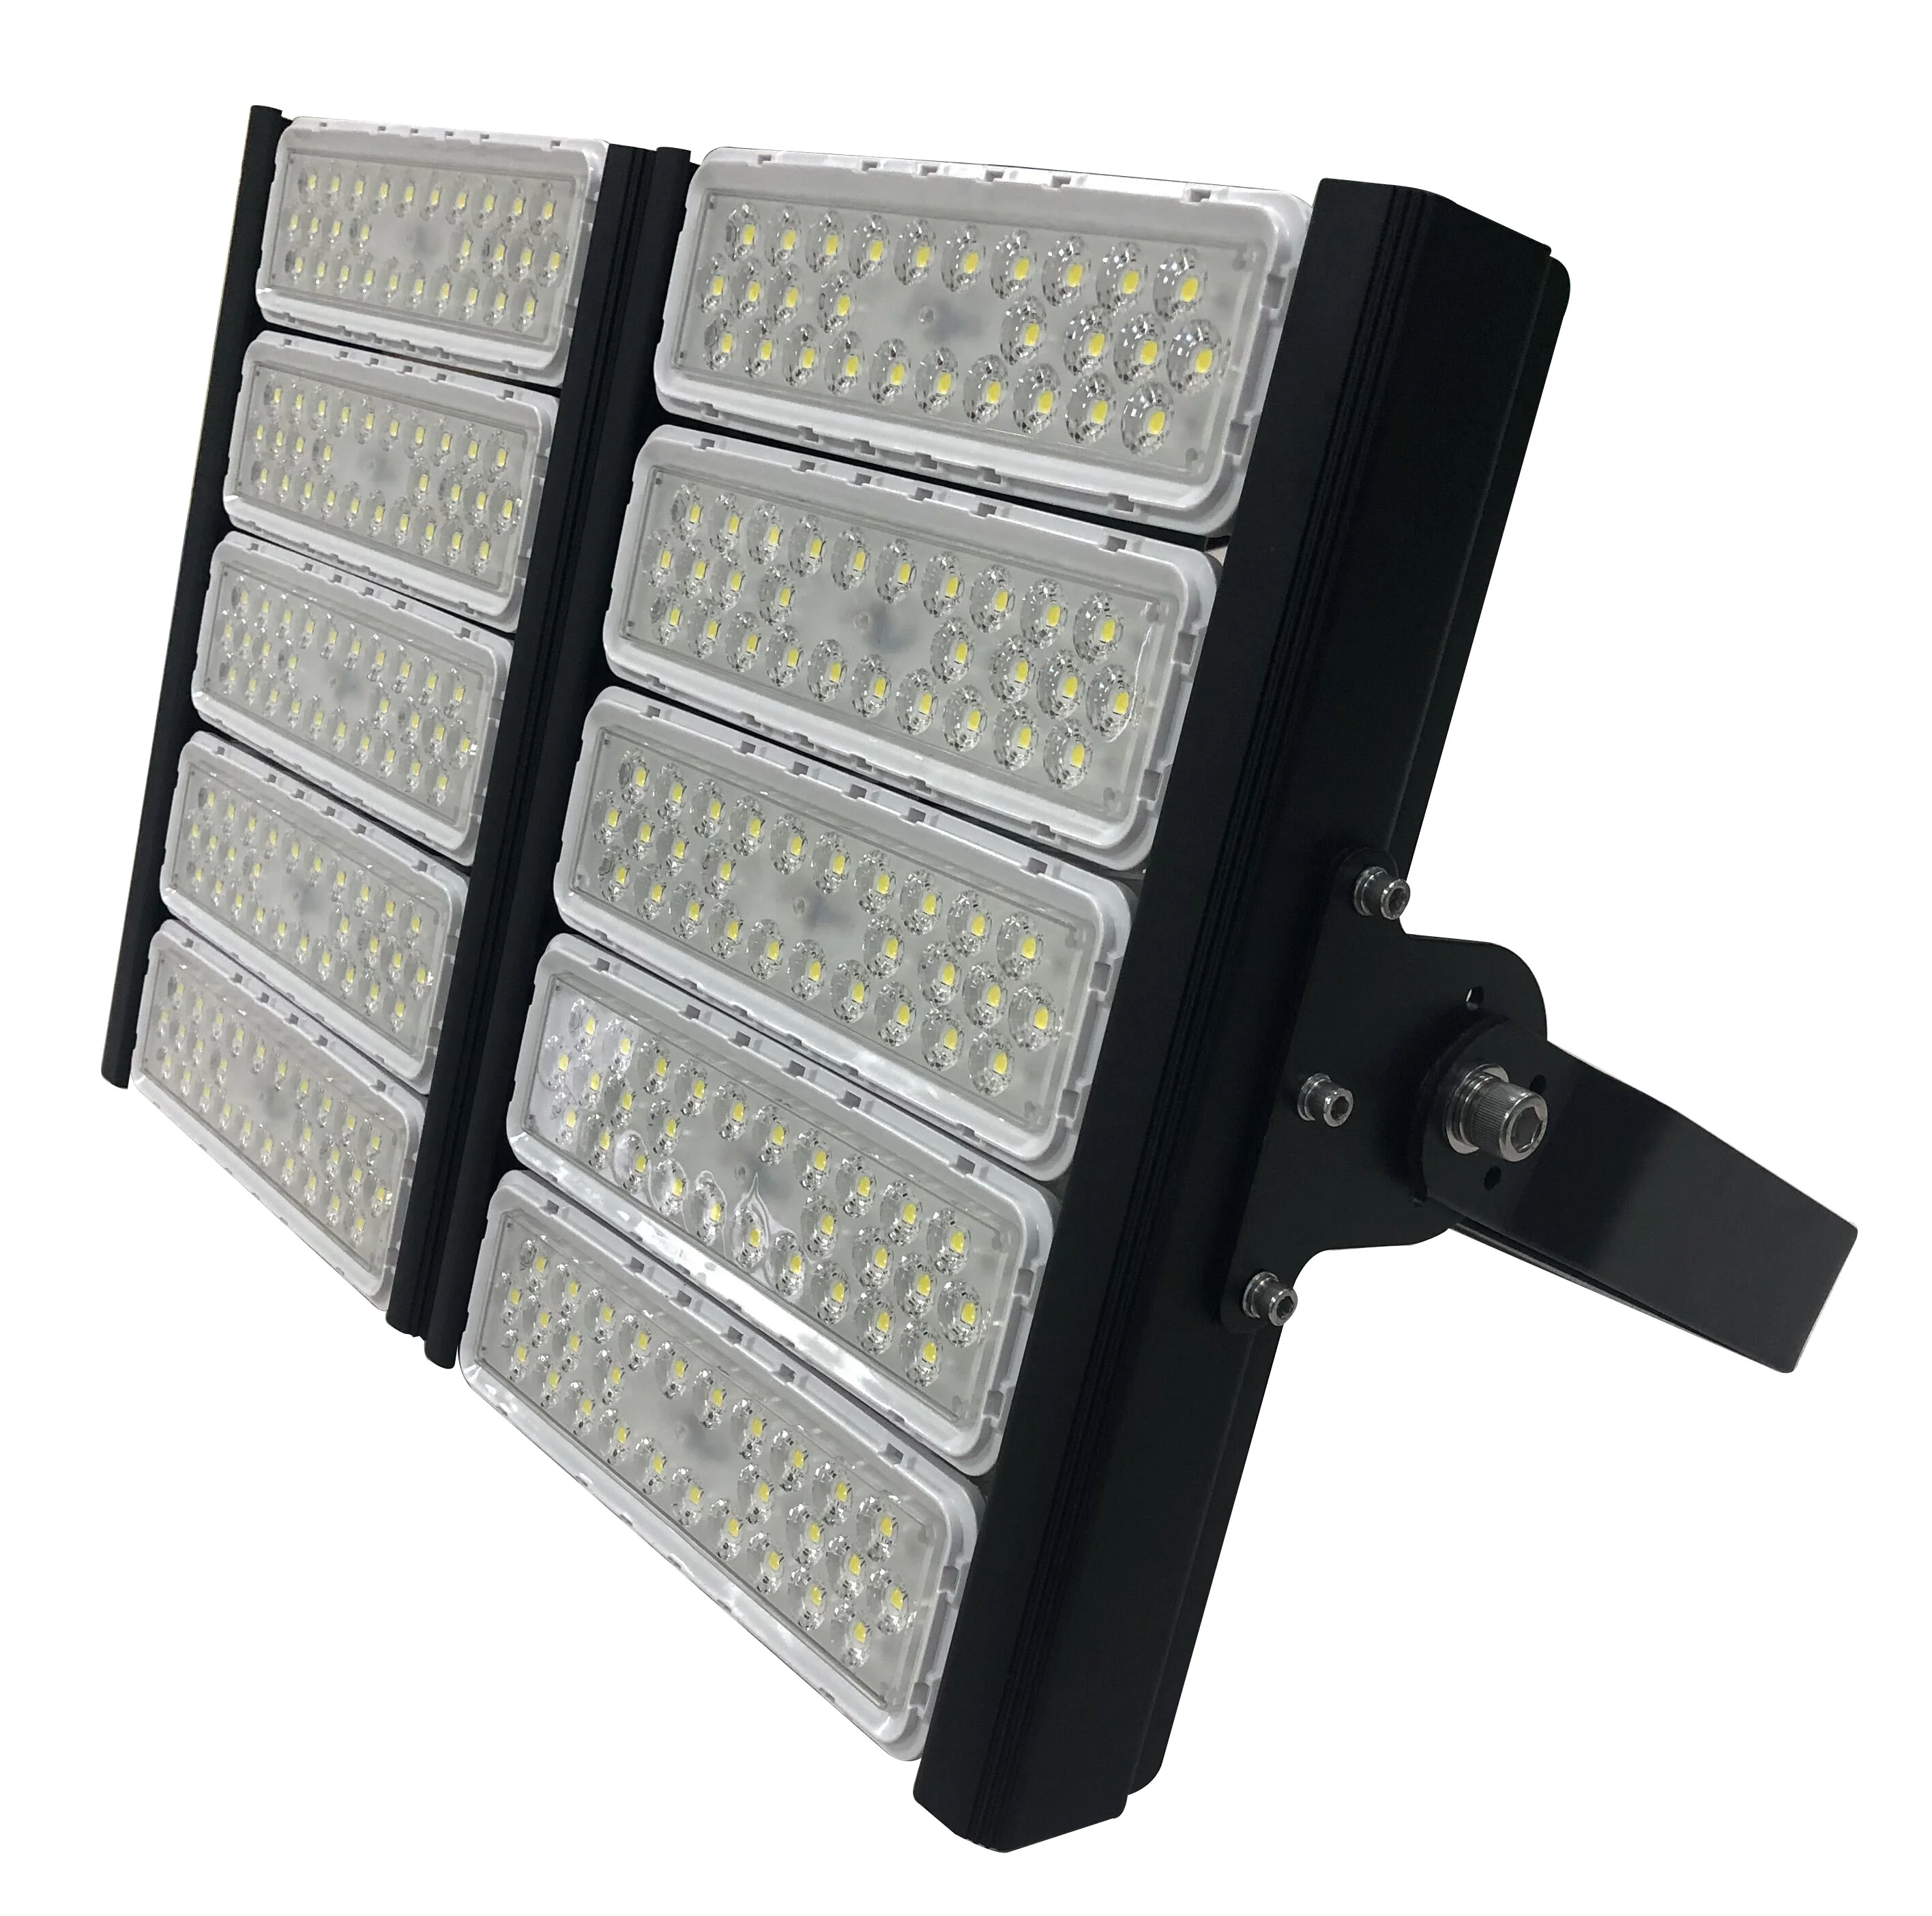 Top rated 600w led solar flood light 150lm/w for led light tower and mining area